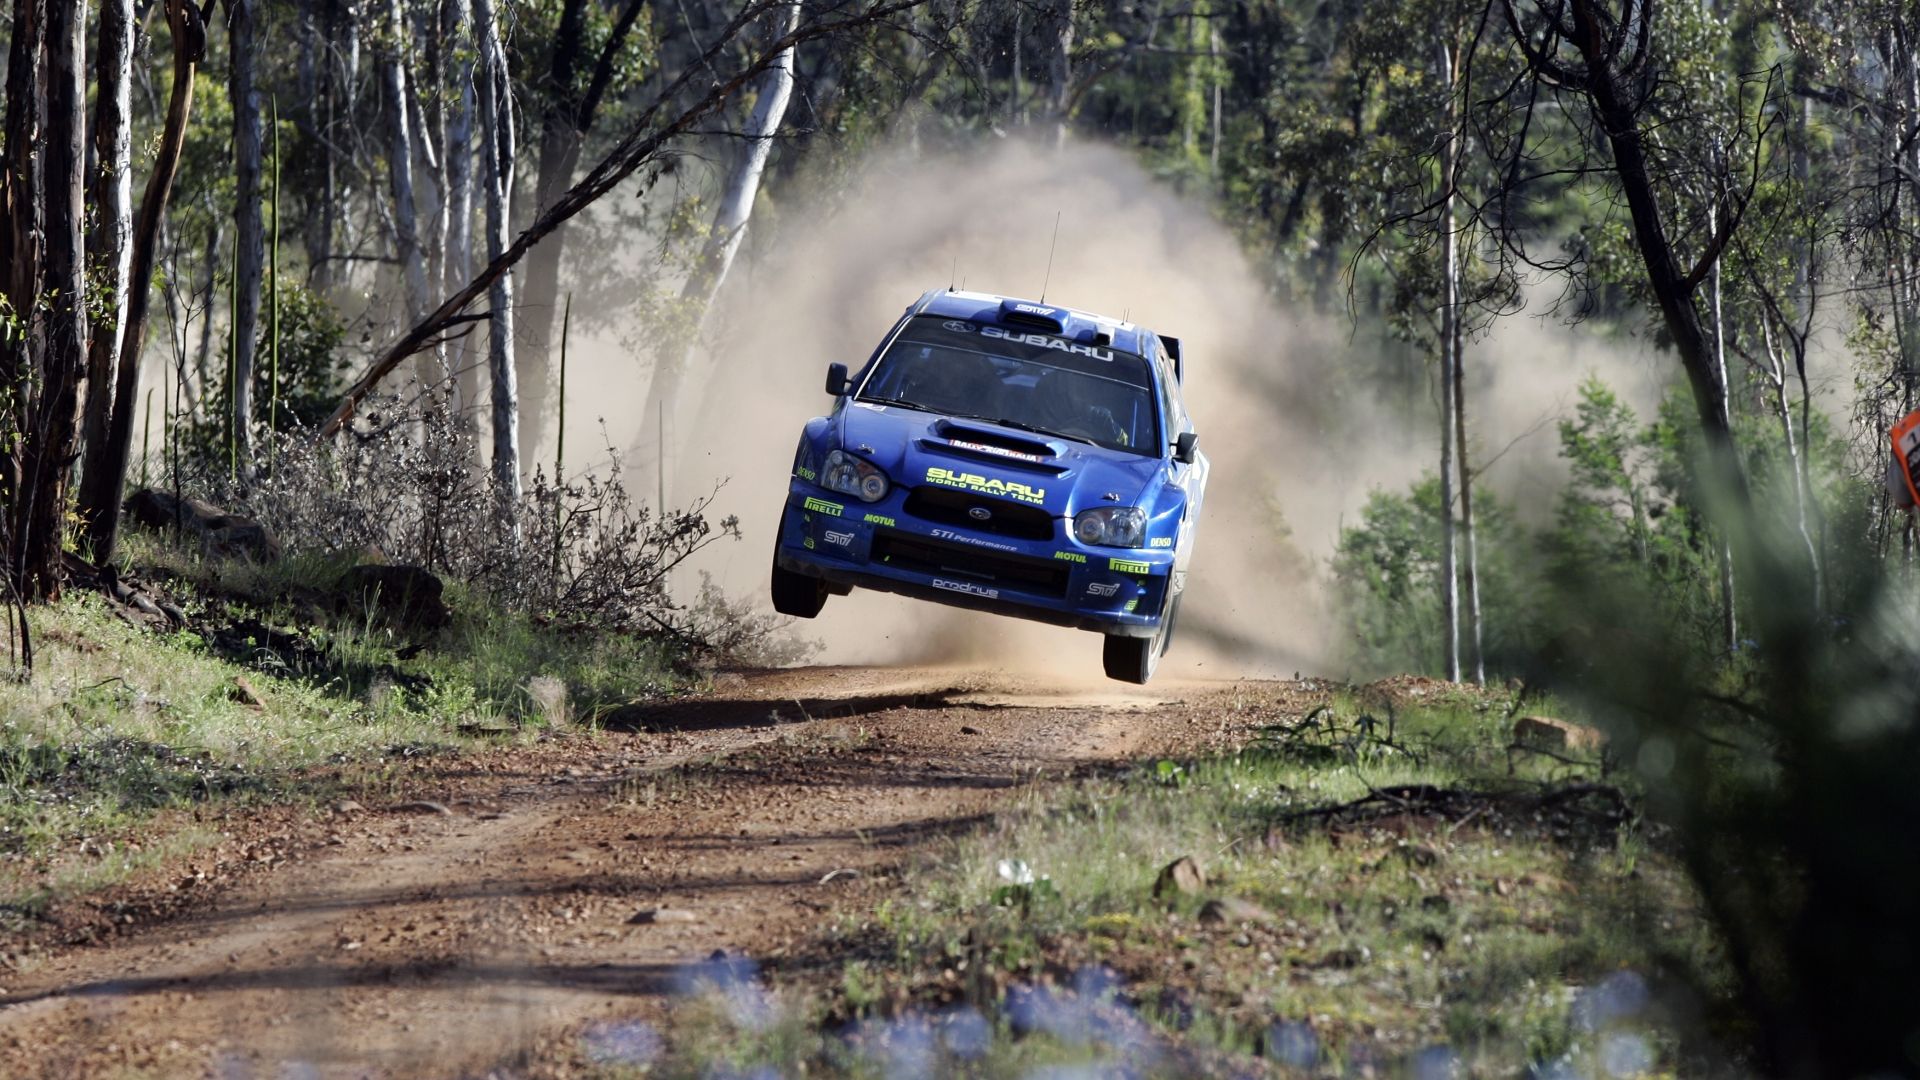 1920x1080 Daily Wallpaper: WRC Subaru Catching Air. I Like To Waste My Time on WallpaperBat